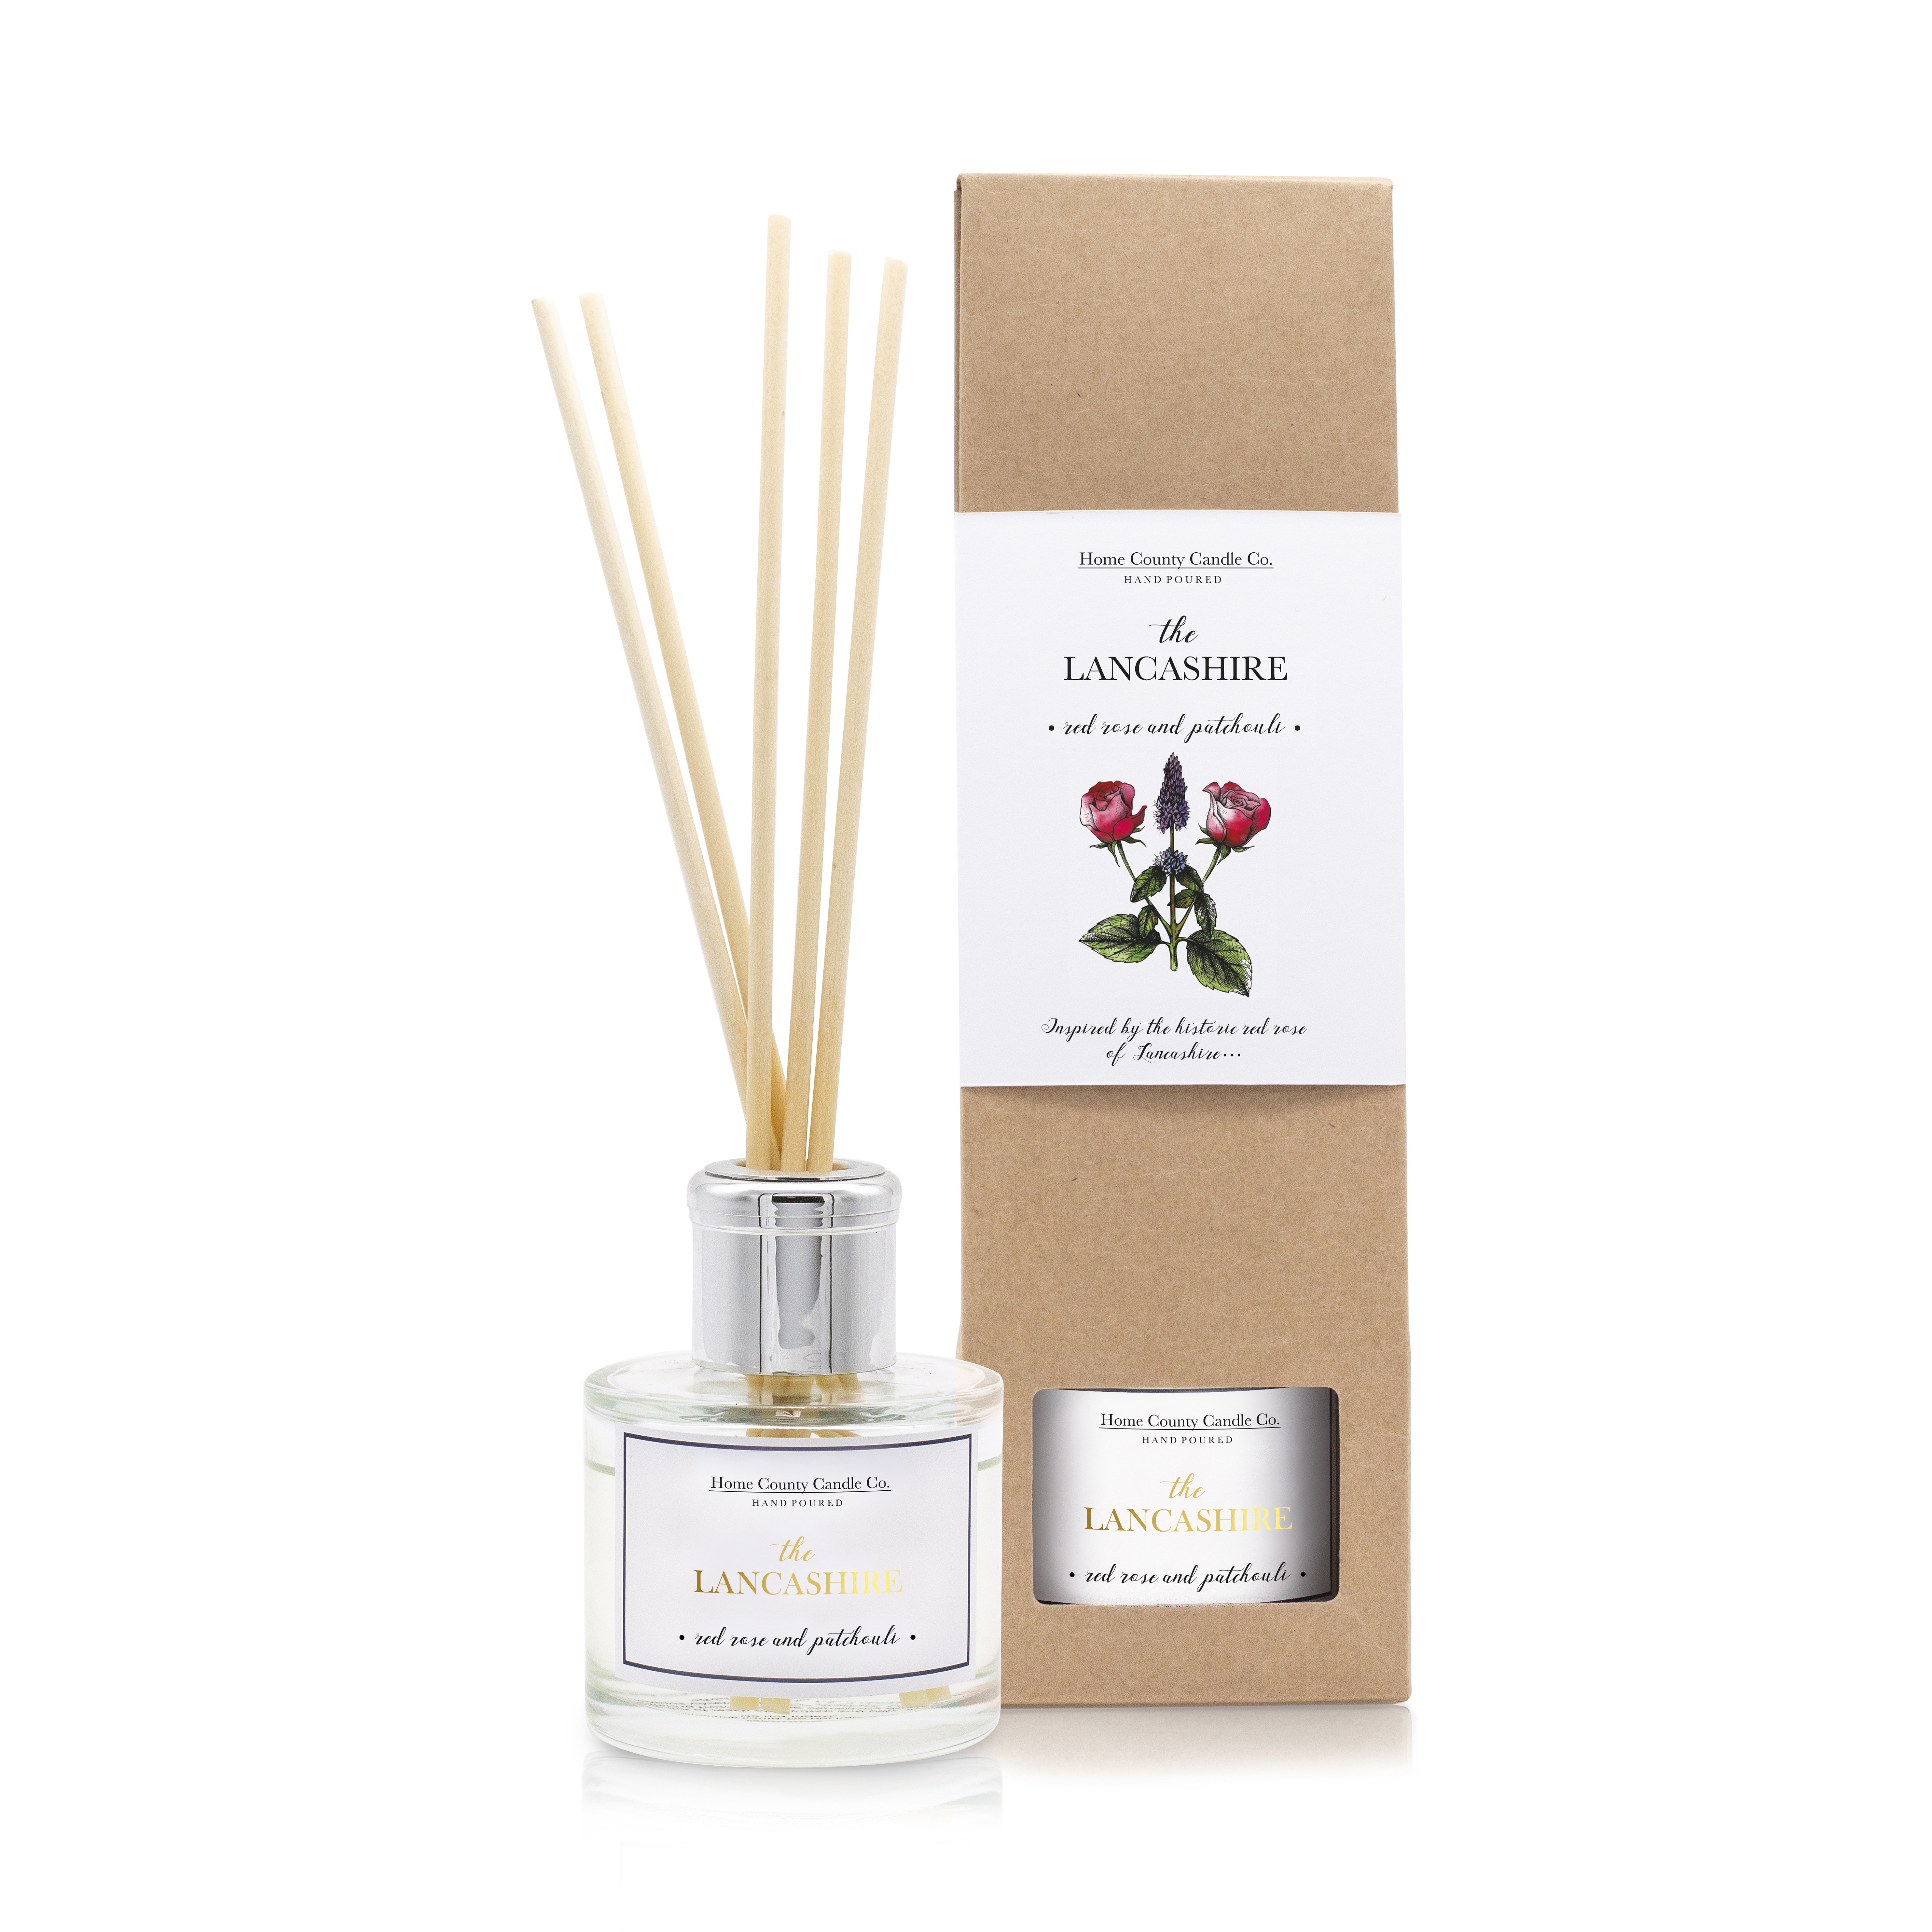 Home County Candle The Lancashire Red Rose and Patchouli Reed Diffuser